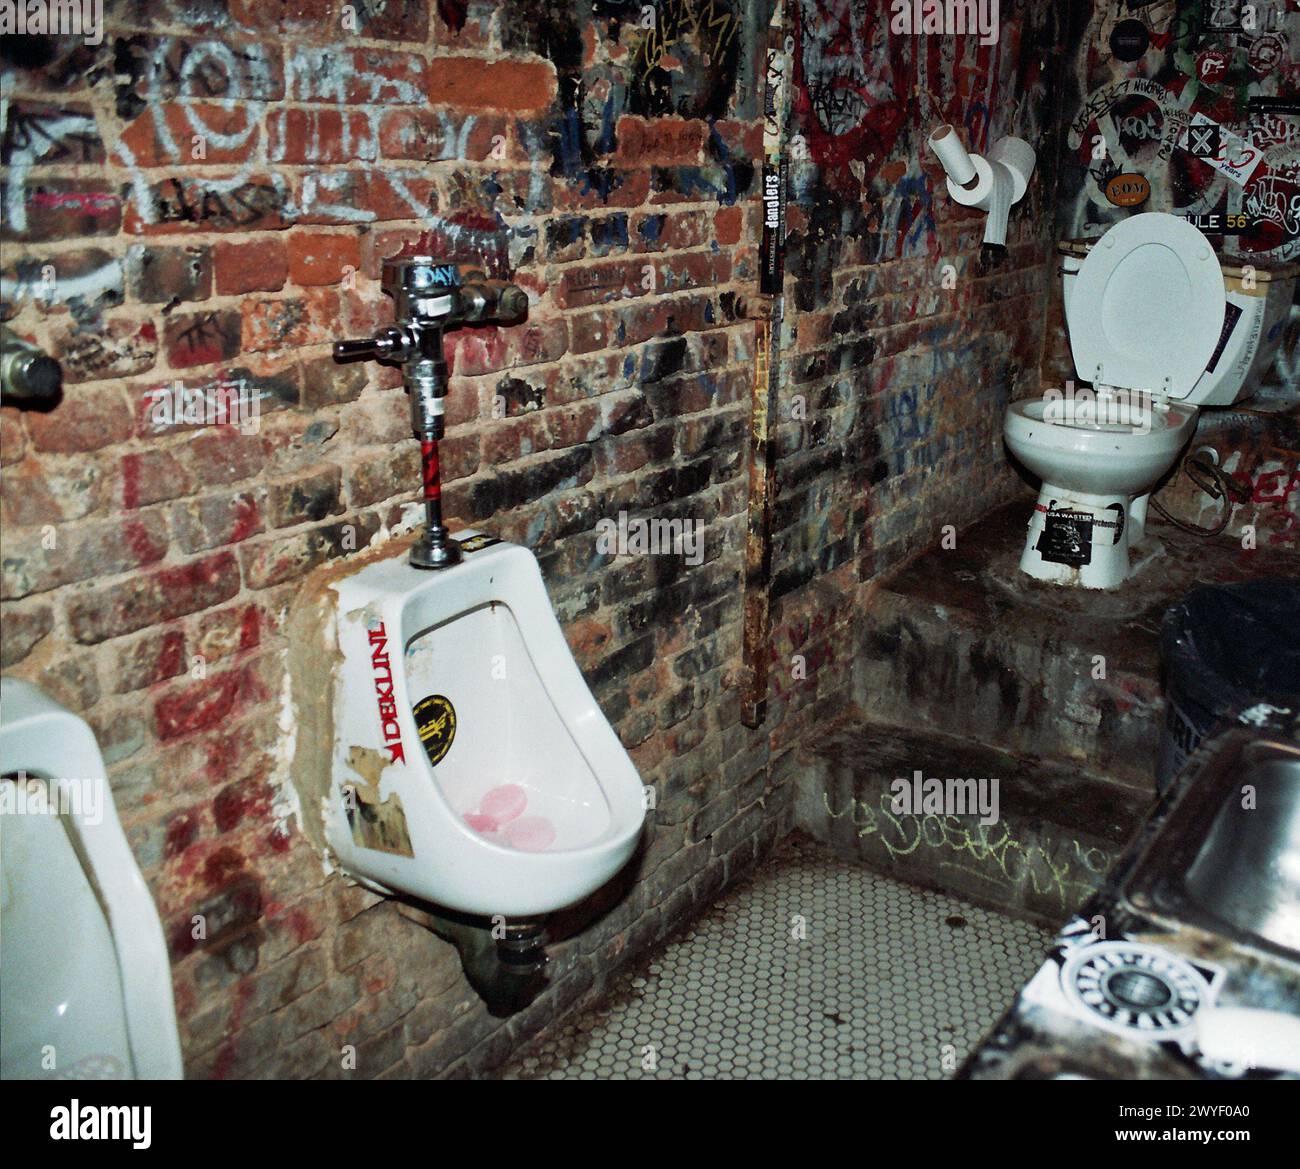 New York America 30th July 2004 Toilets in CBGB & OMFUG club The name CBGB was a combination of Country, Bluegrass, Blues. OMFUG stands for 'Other Music For Uplifting Gourmandizer A Gourmandizer is a person who is devoted to eating and drinking to excess. The club closed in October 2006 (c)Ged Noonan/Alamy Stock Photo